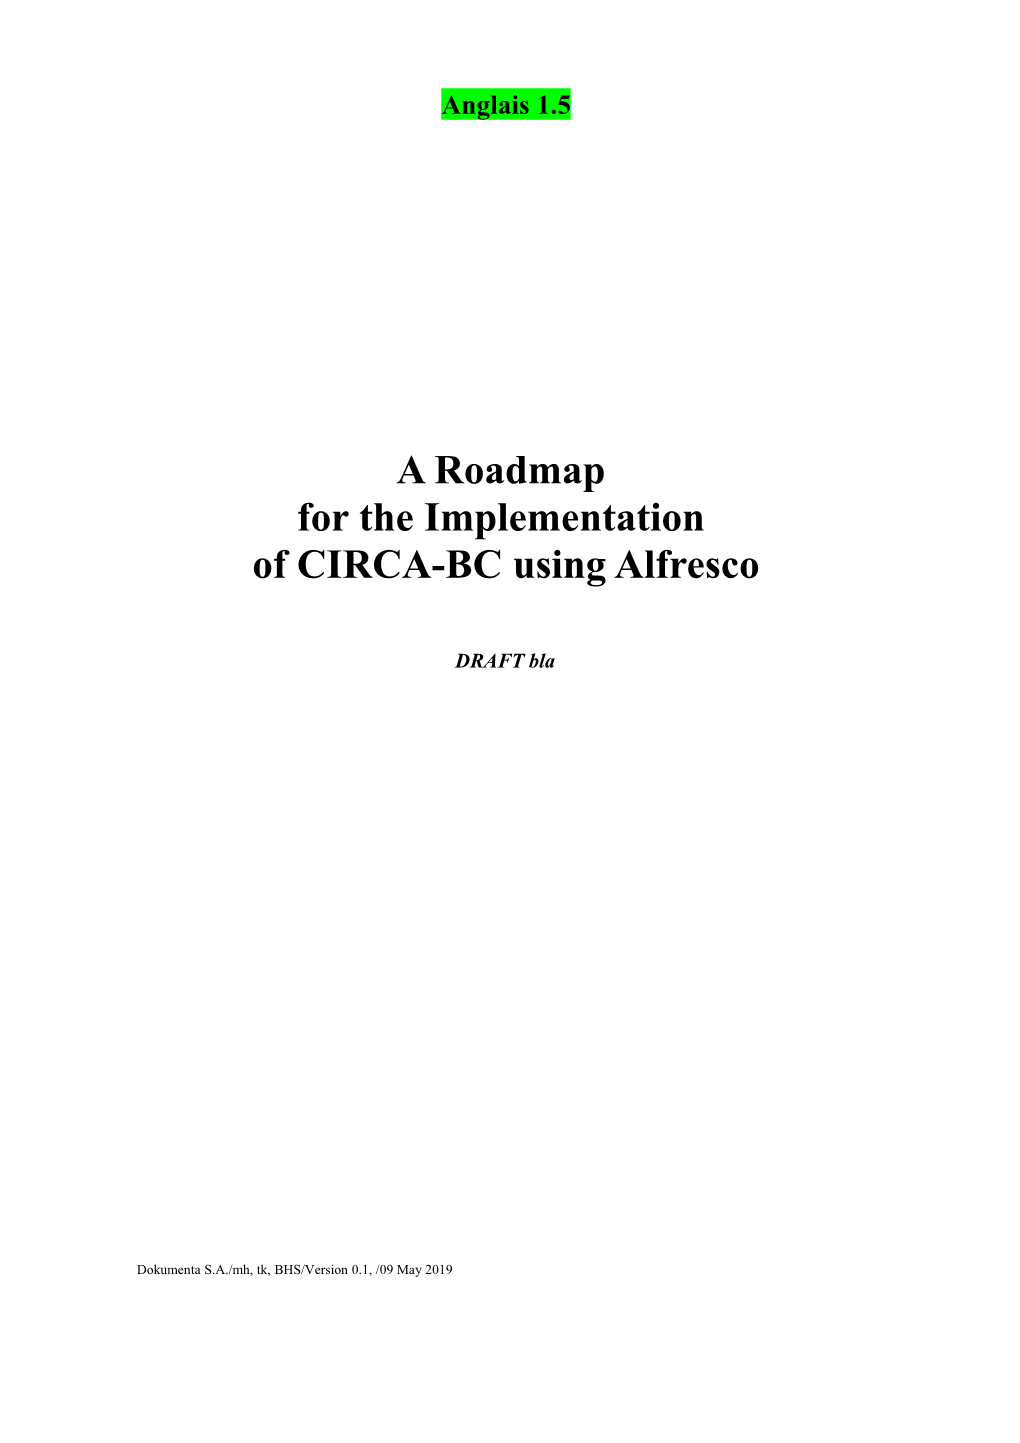 A Roadmap for the Implementation of CIRCA-BC Using Alfresco